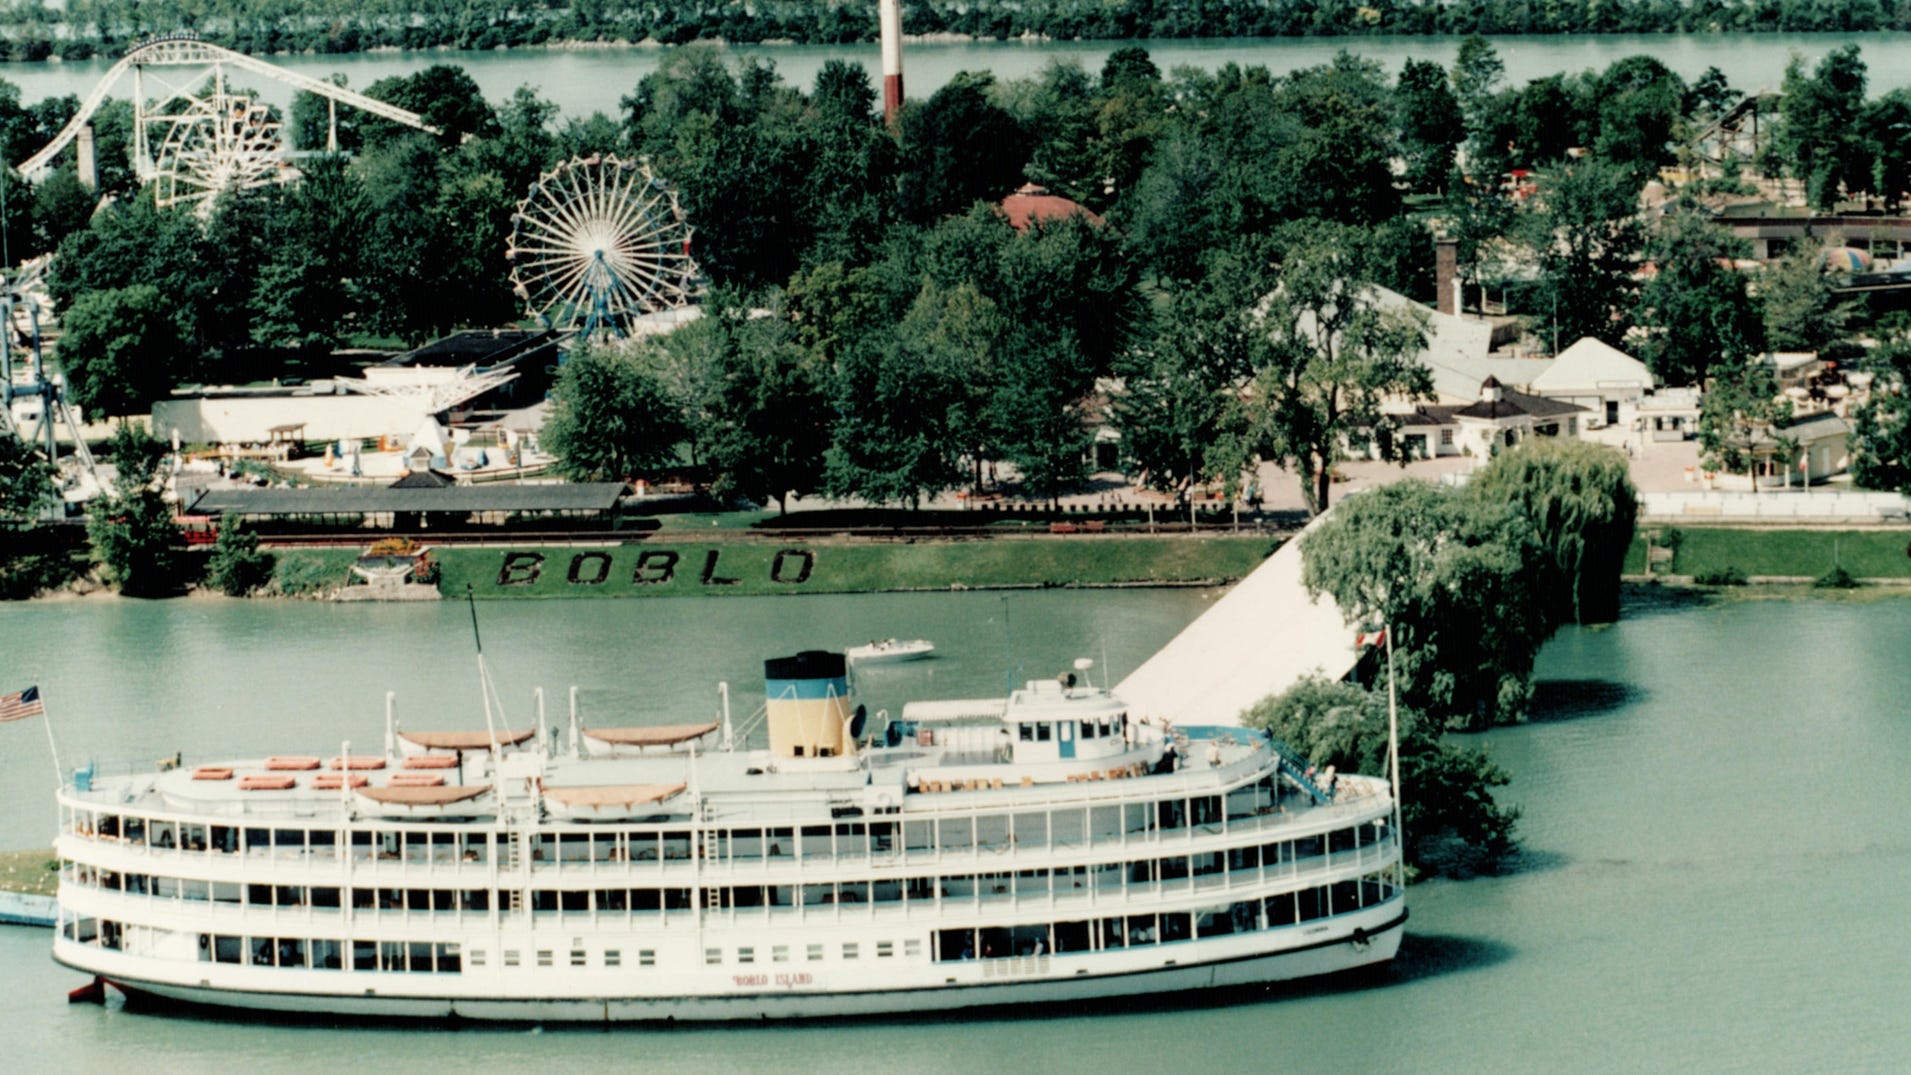 WATCH See excerpt from "Boblo Boats A Detroit Ferry Tale" documentary